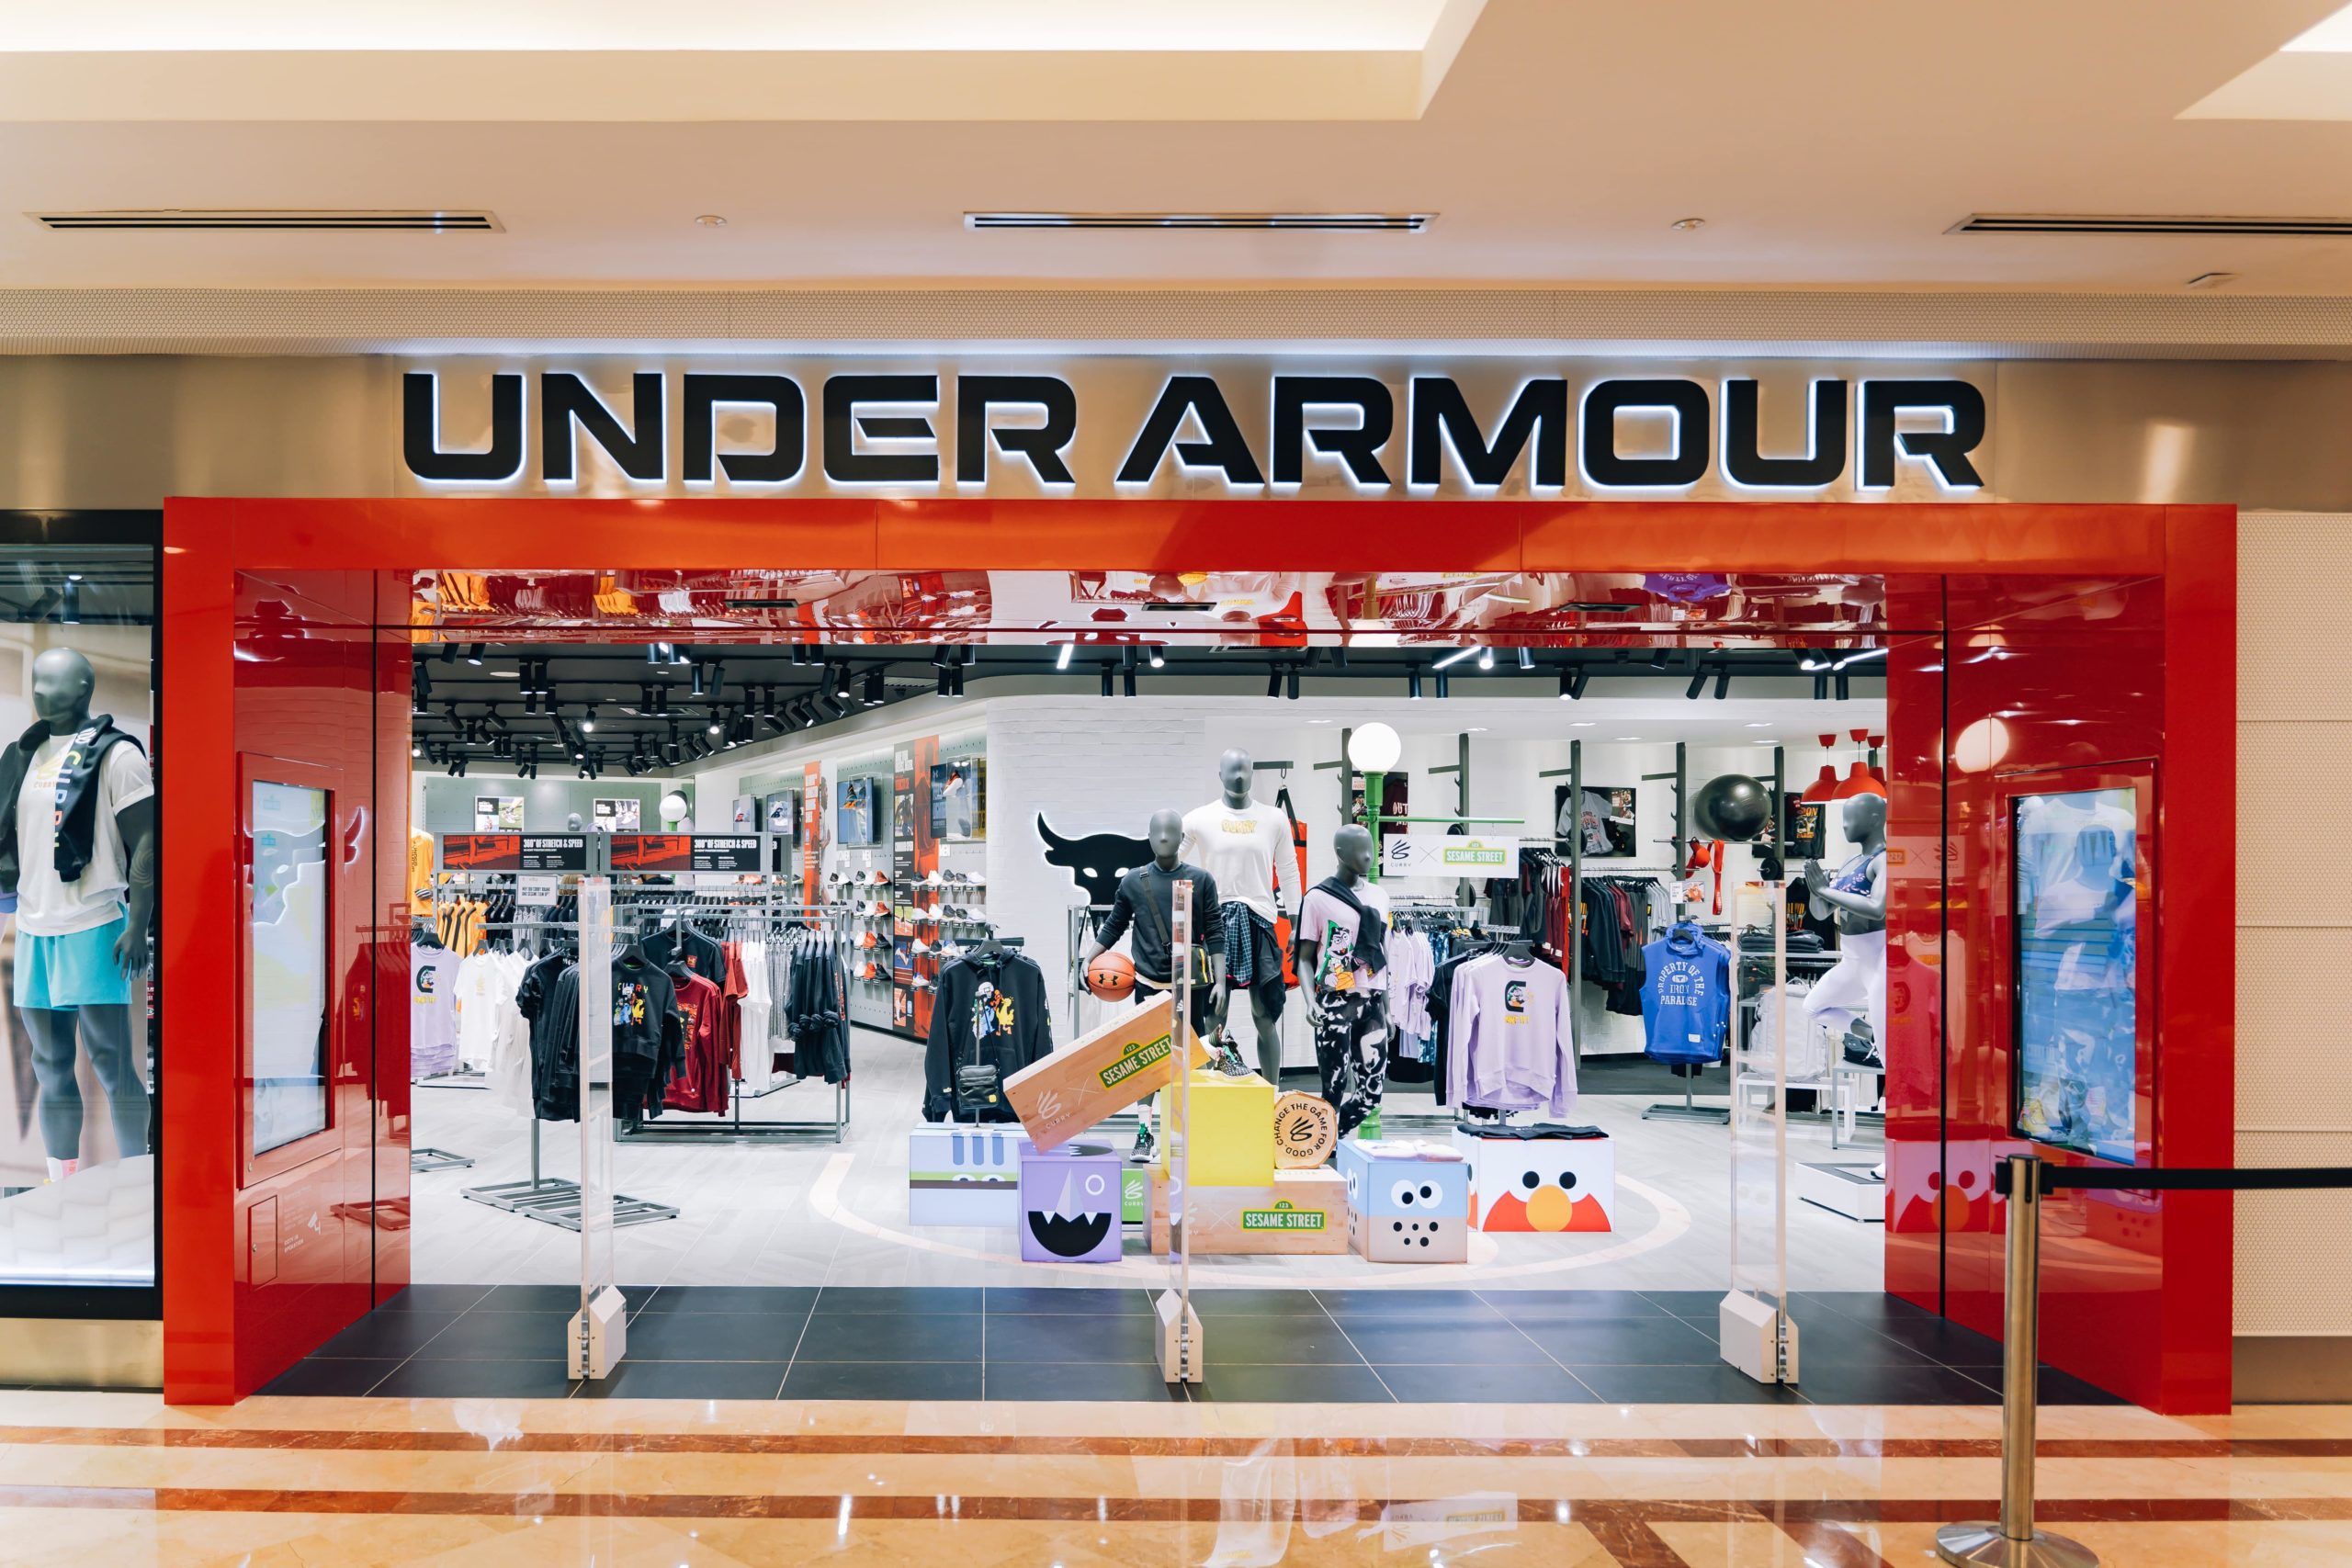 Under Armour's concept in KLCC is its in Malaysia